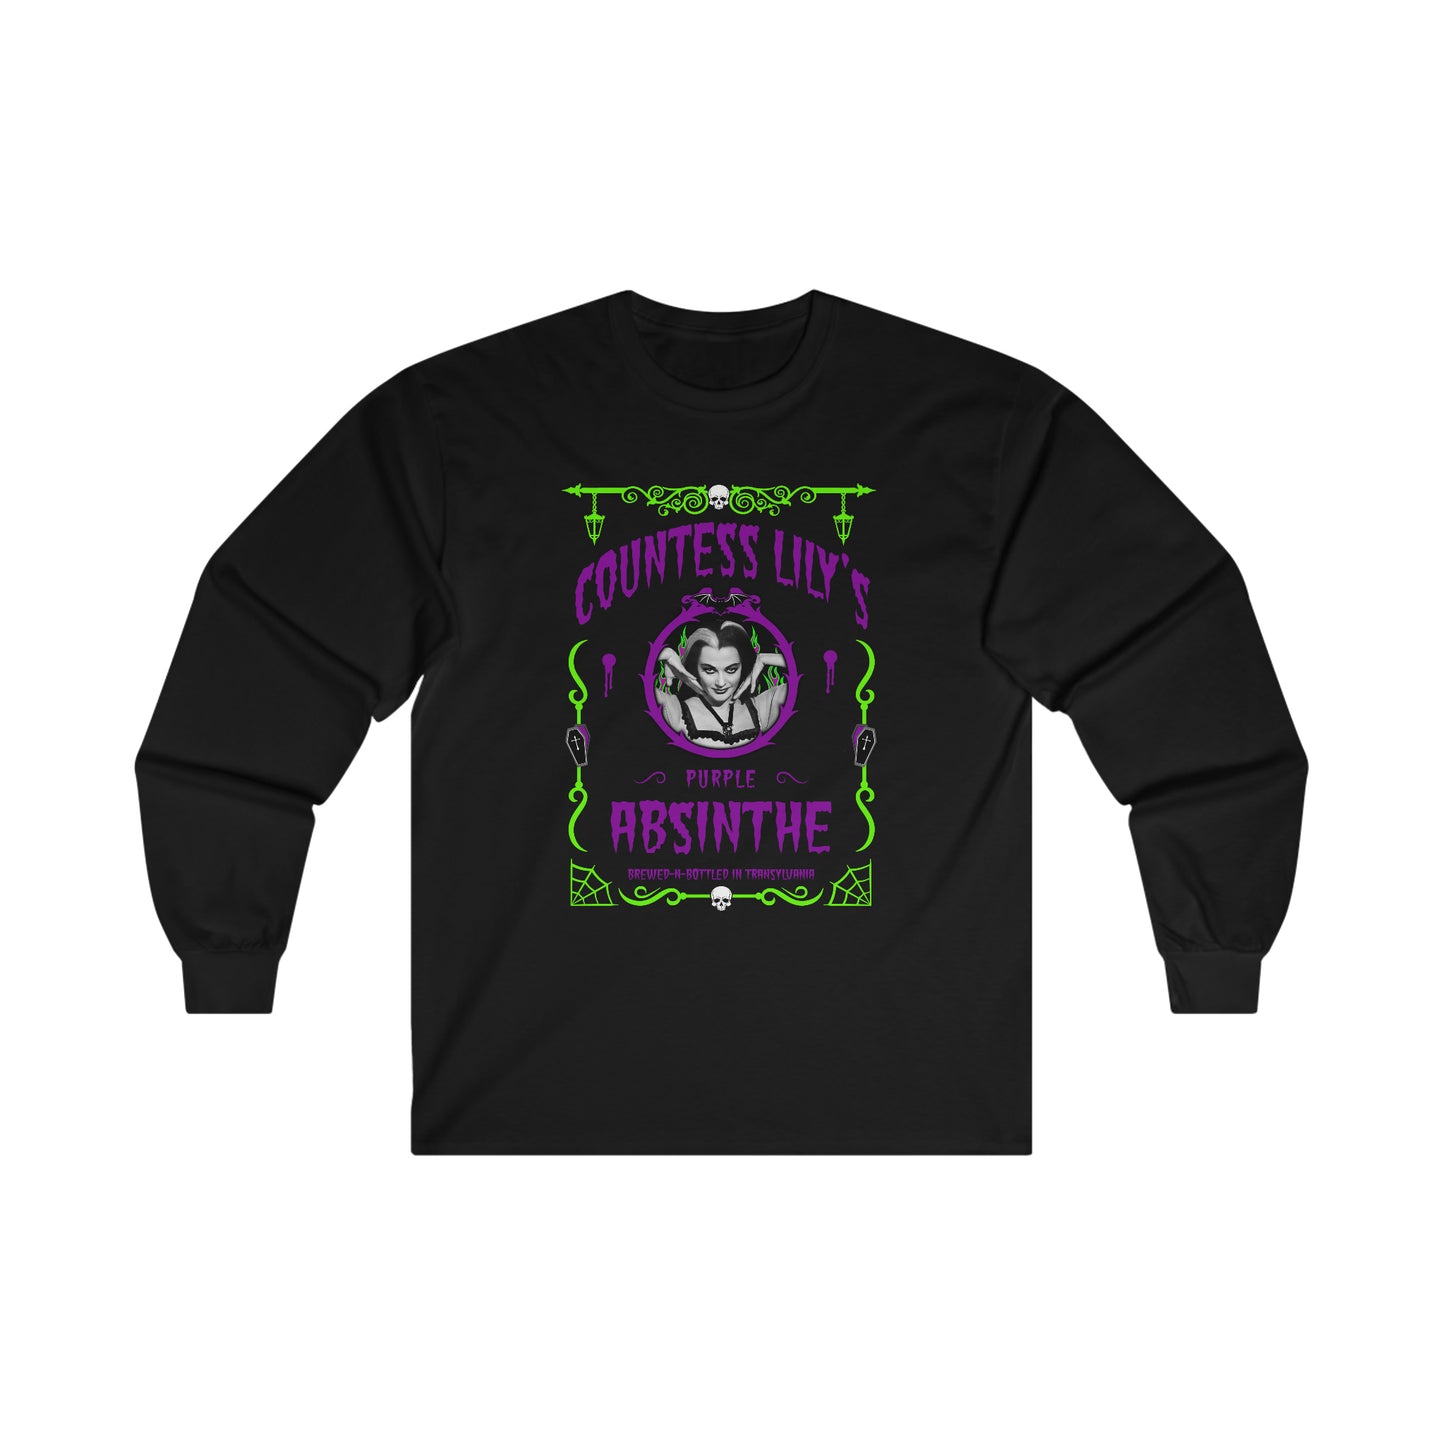 ABSINTHE MONSTERS 3 (COUNTESS LILY) Ultra Cotton Long Sleeve Tee